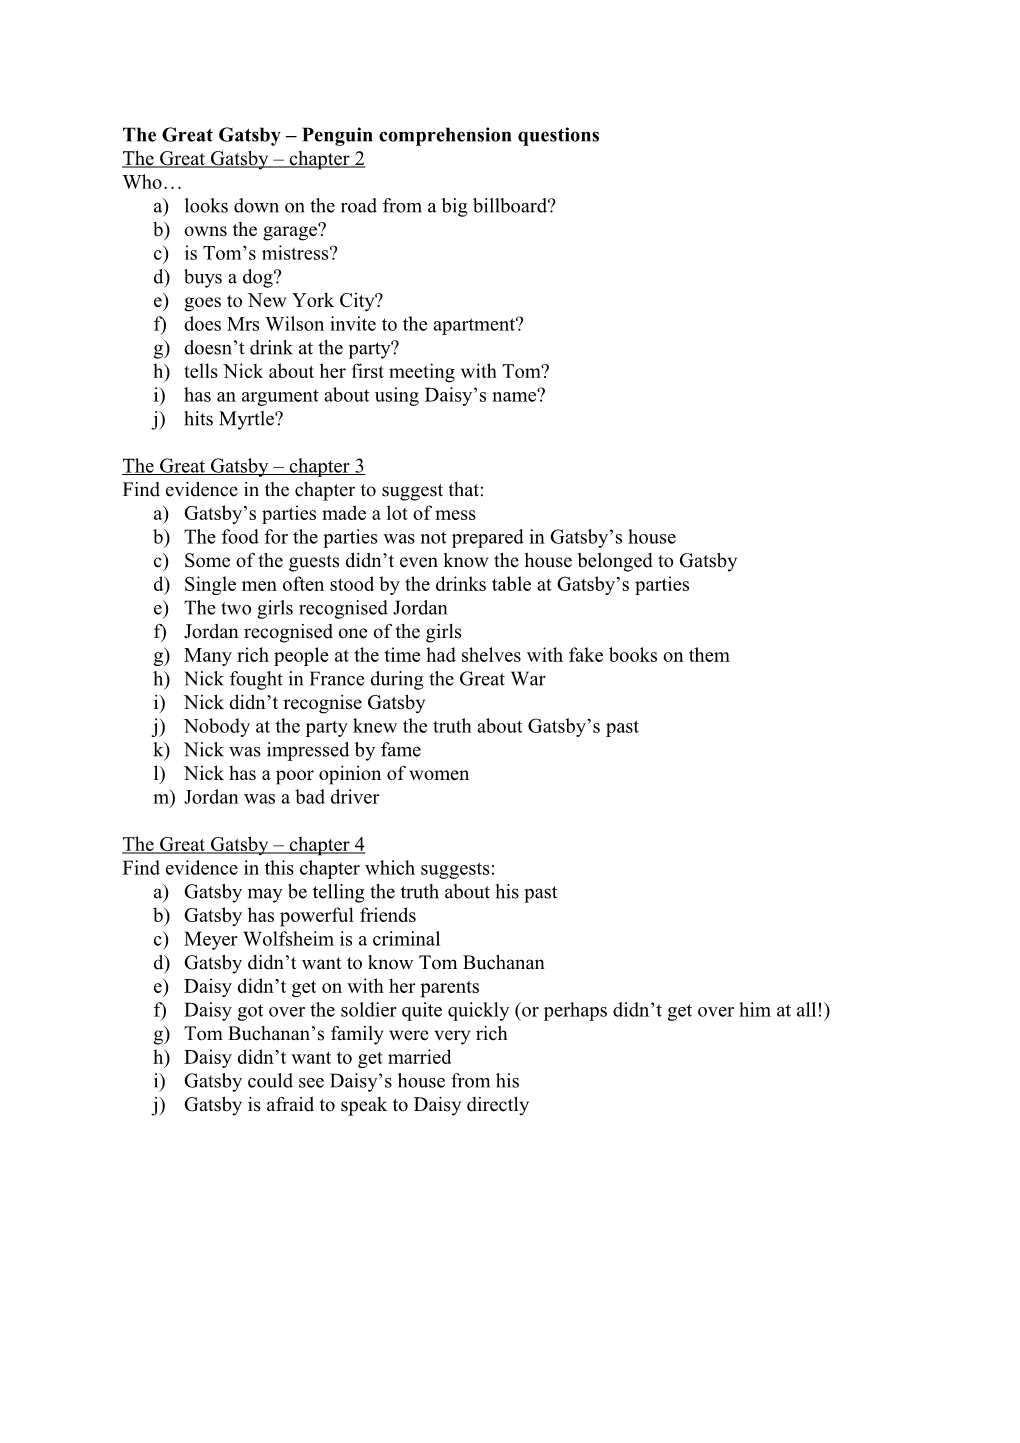 The Great Gatsby Penguin Comprehension Questions